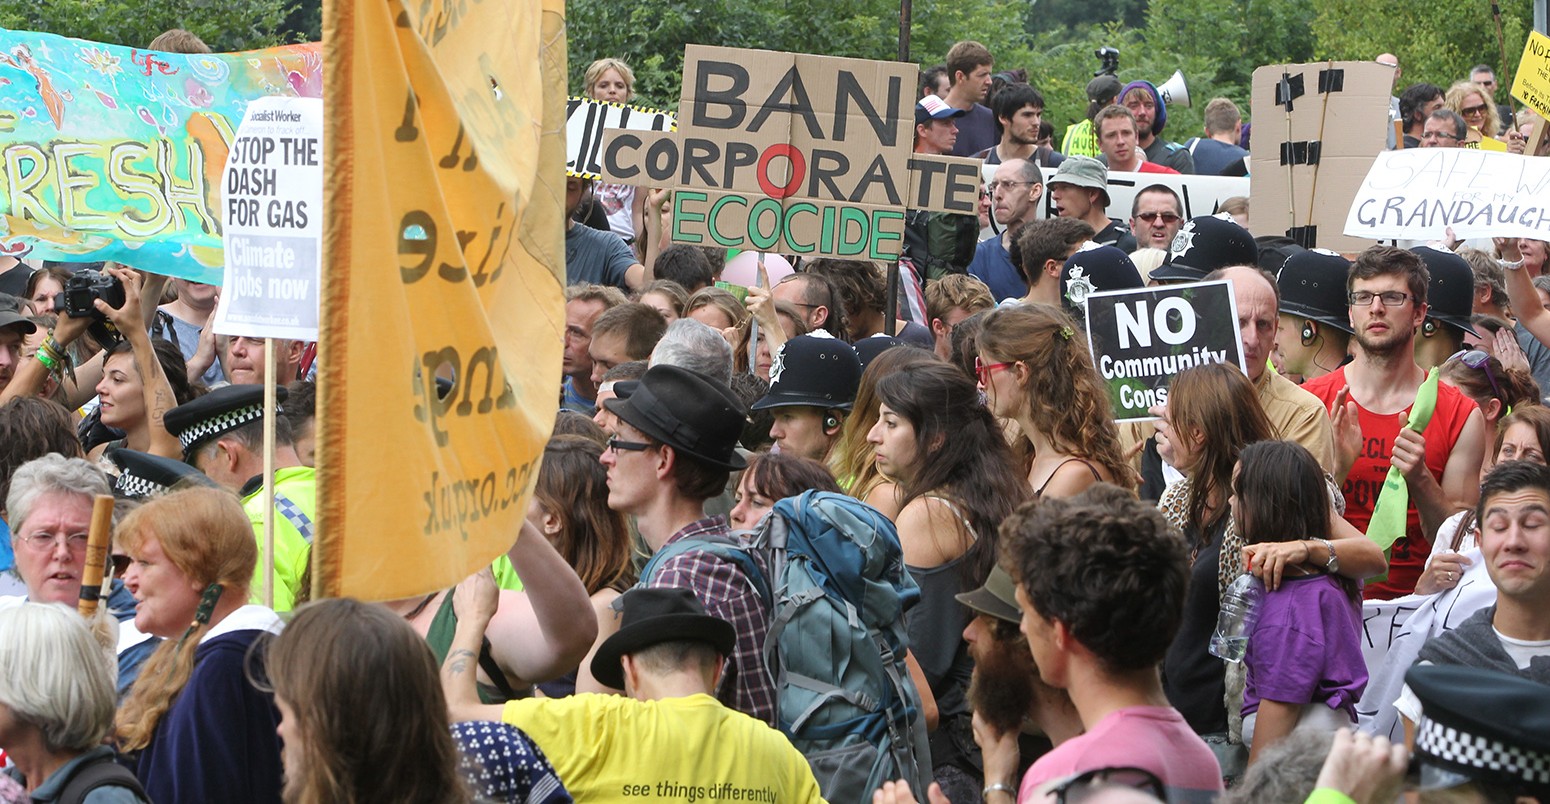 People gather together for an anti-fracking protest march against the energy company Cuadrilla on August 18, 2013 in Balcombe, UK